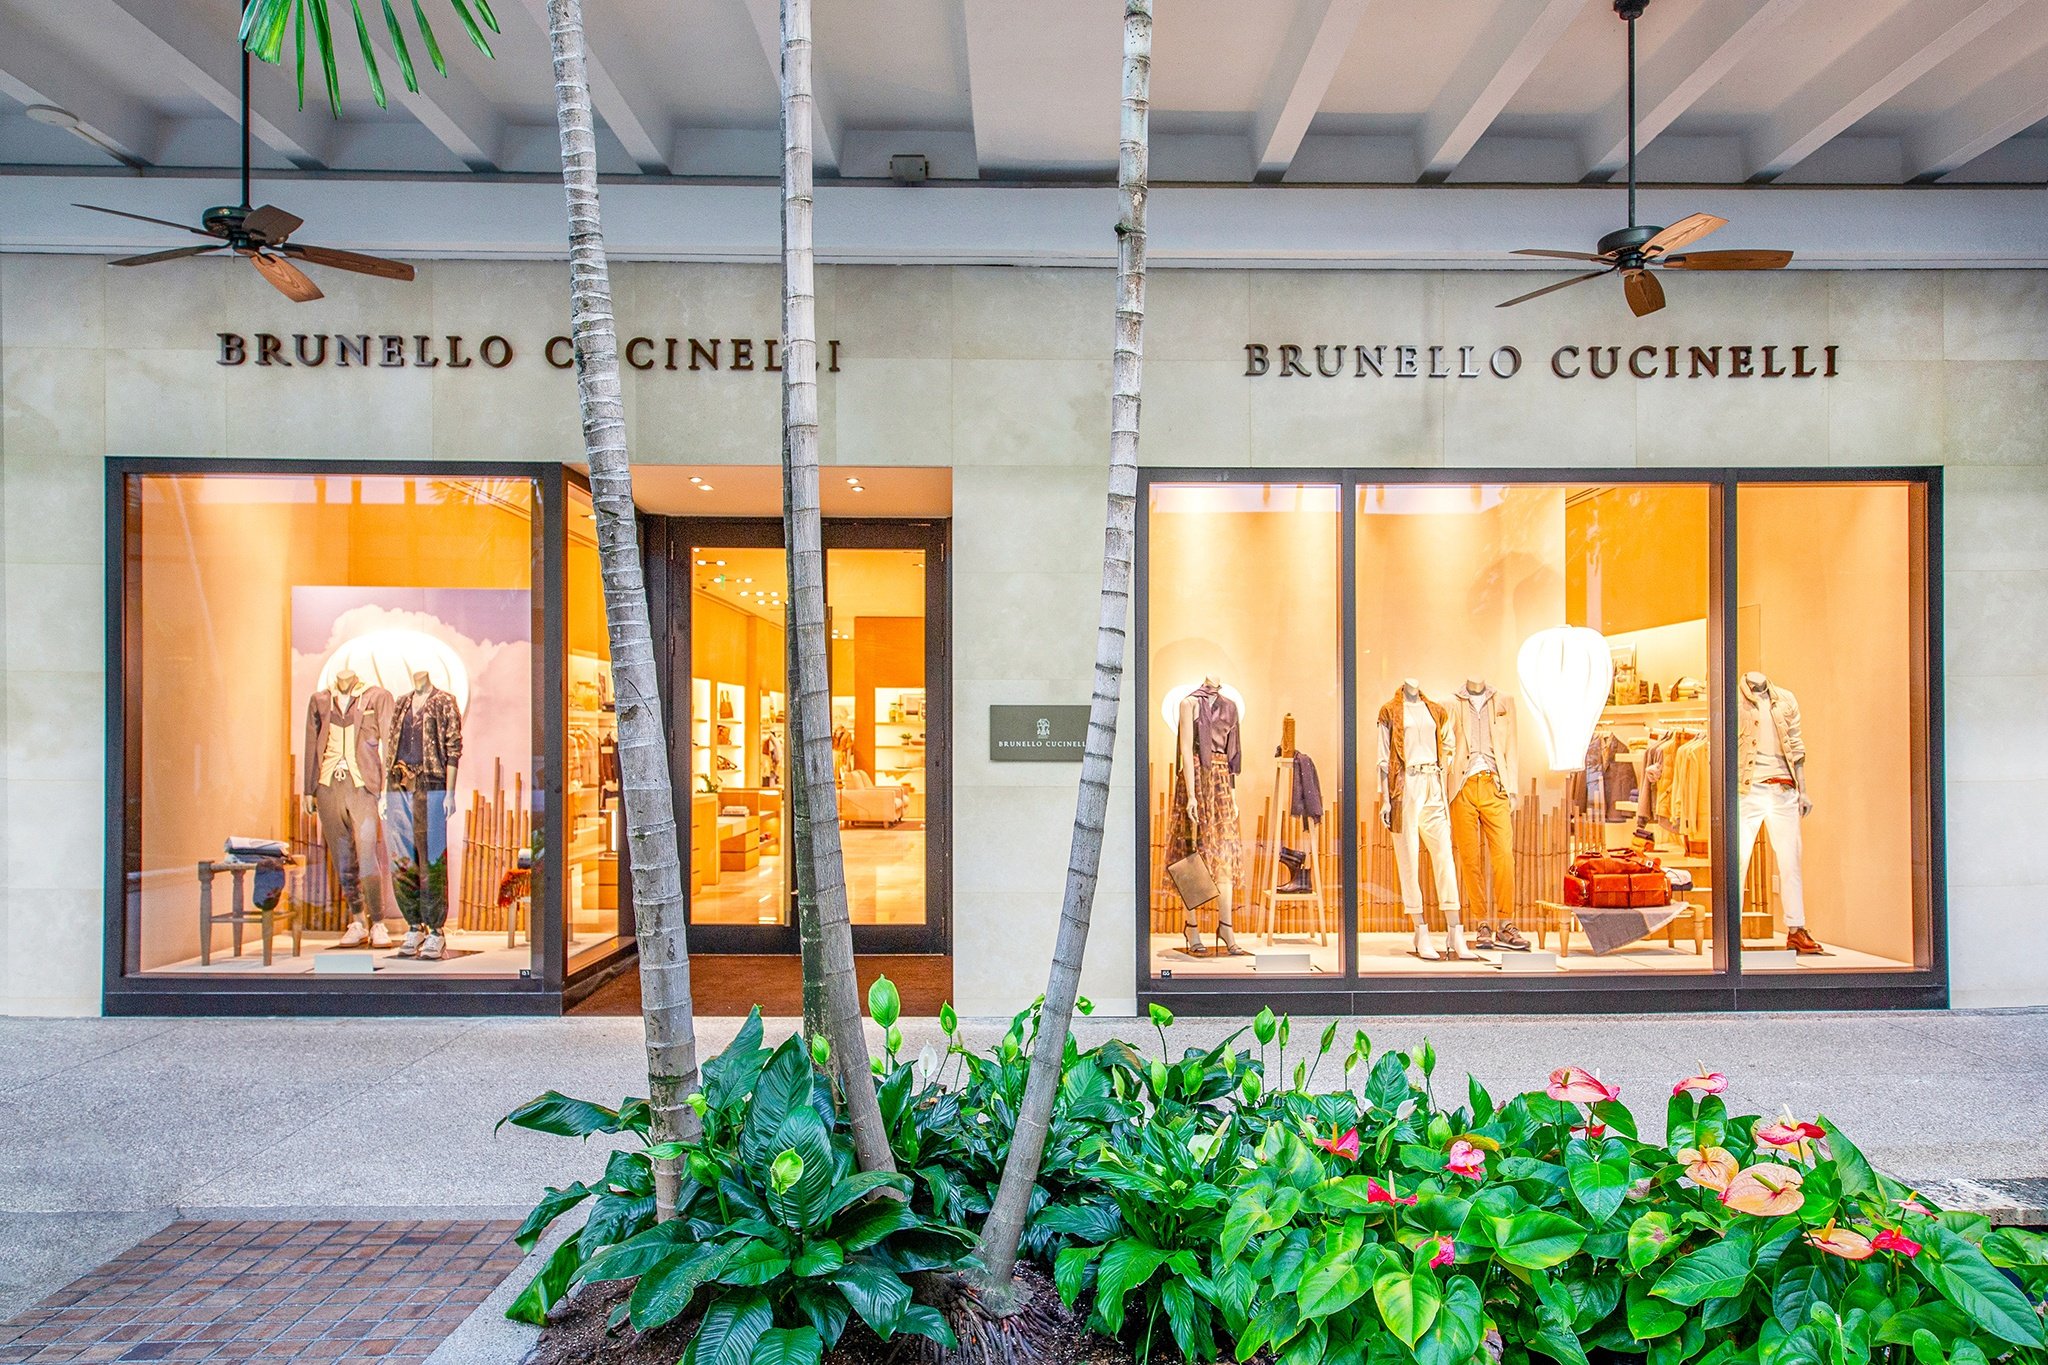 Outside the newly opened Brunello Cucinelli Bal Harbour boutique on Level 1.